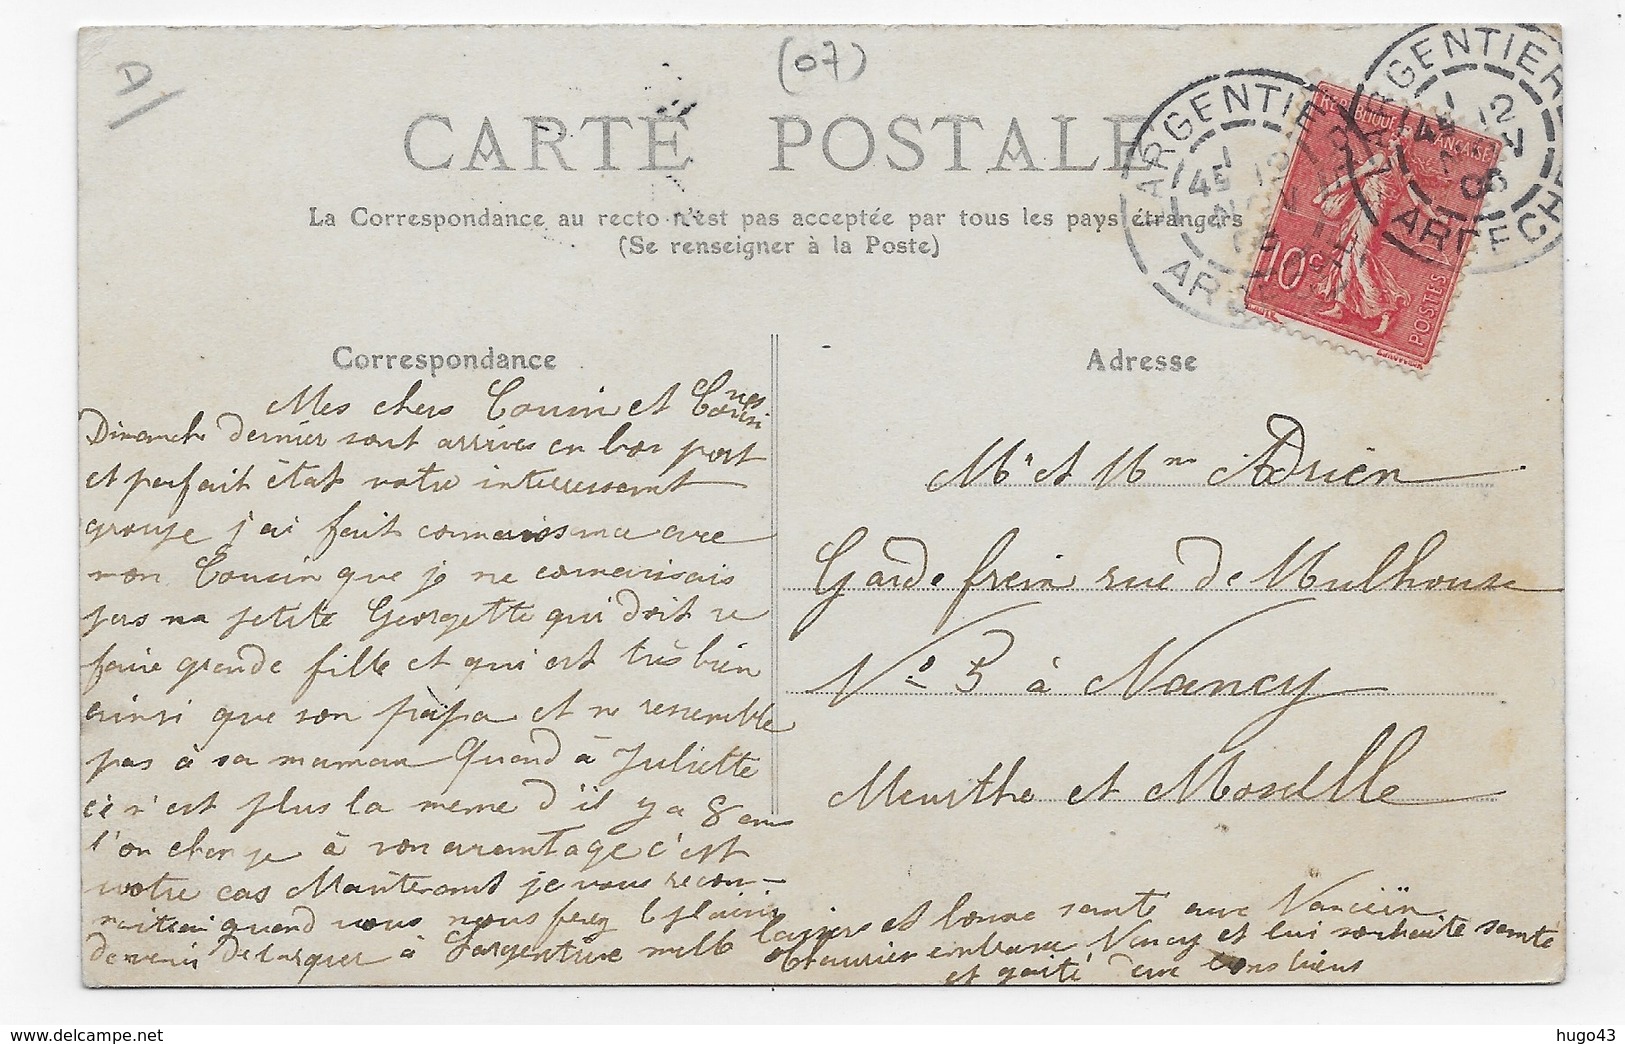 (RECTO / VERSO) LARGENTIERE EN 1906 - N° 752 - PLACE MAZAN - LE GRAND HOTEL D' EUROPE ANIME - BEAU CACHET - CPA VOYAGEE - Largentiere